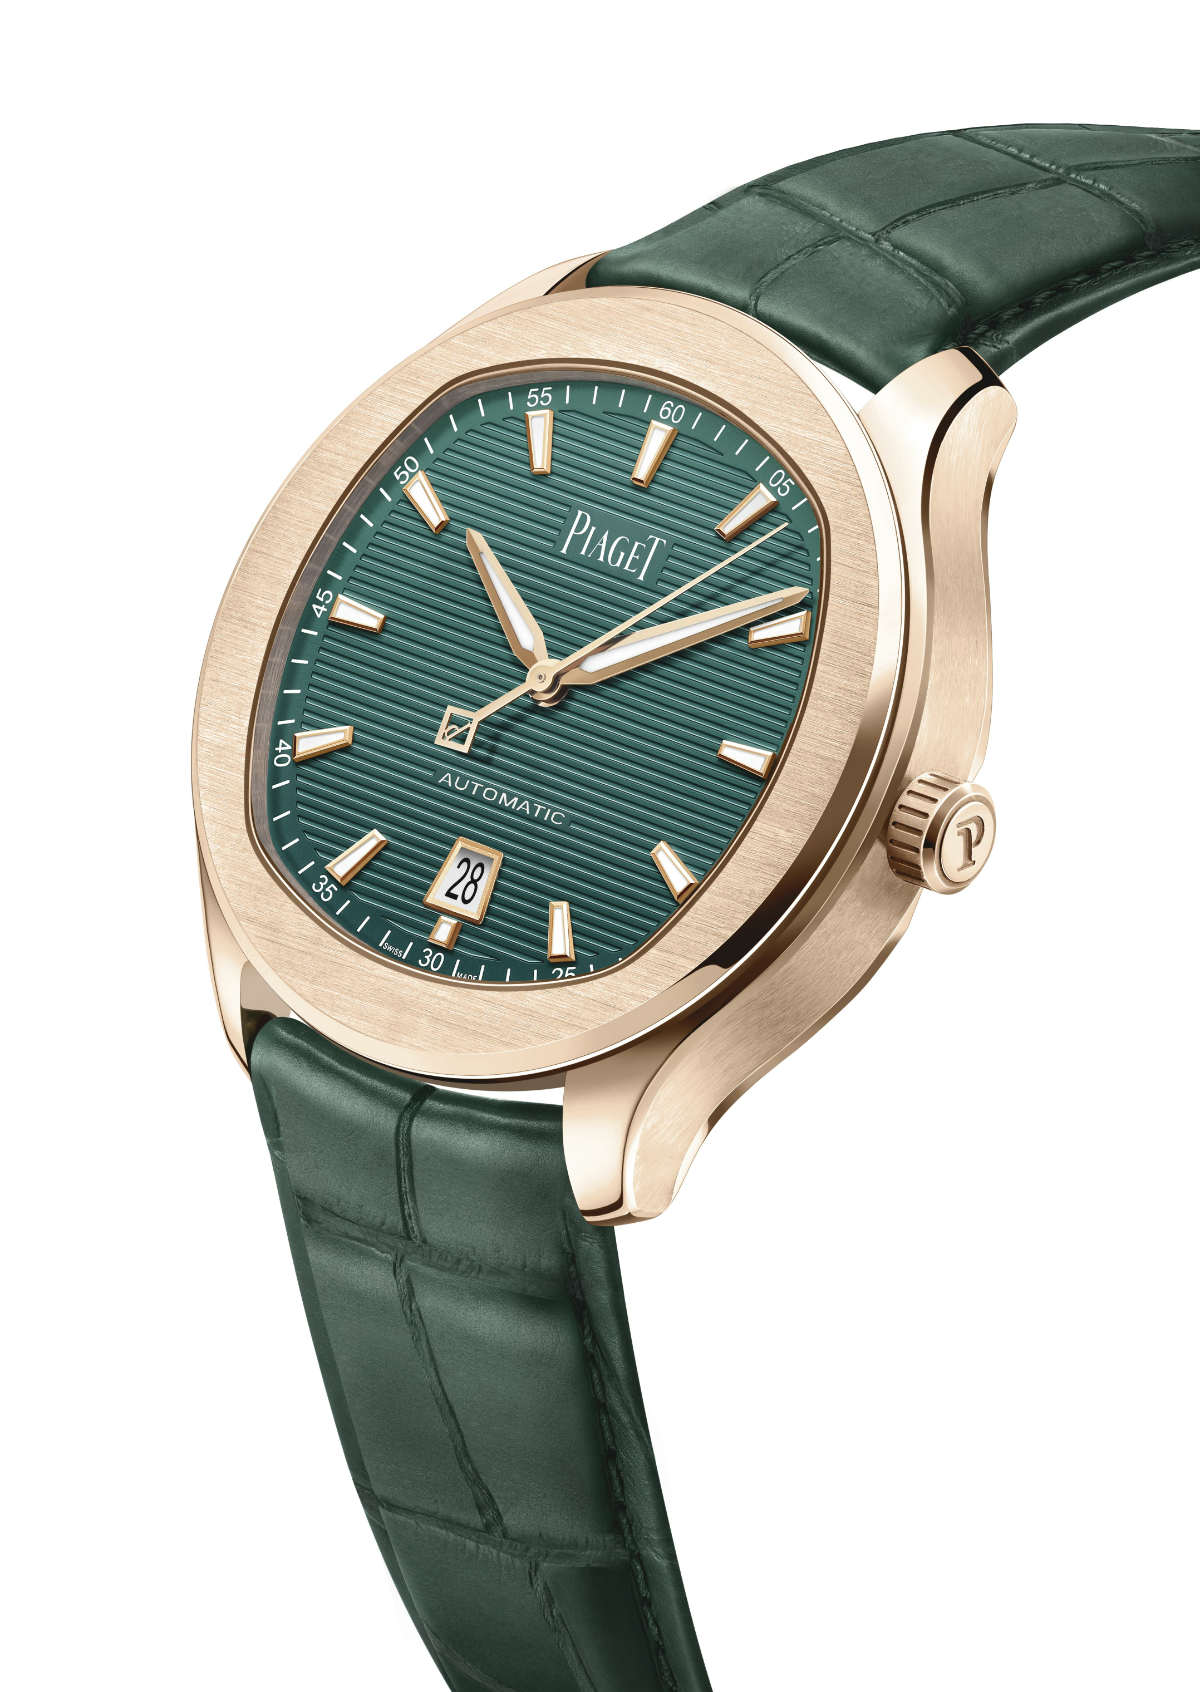 Green Meets The Piaget Polo In Two New Models